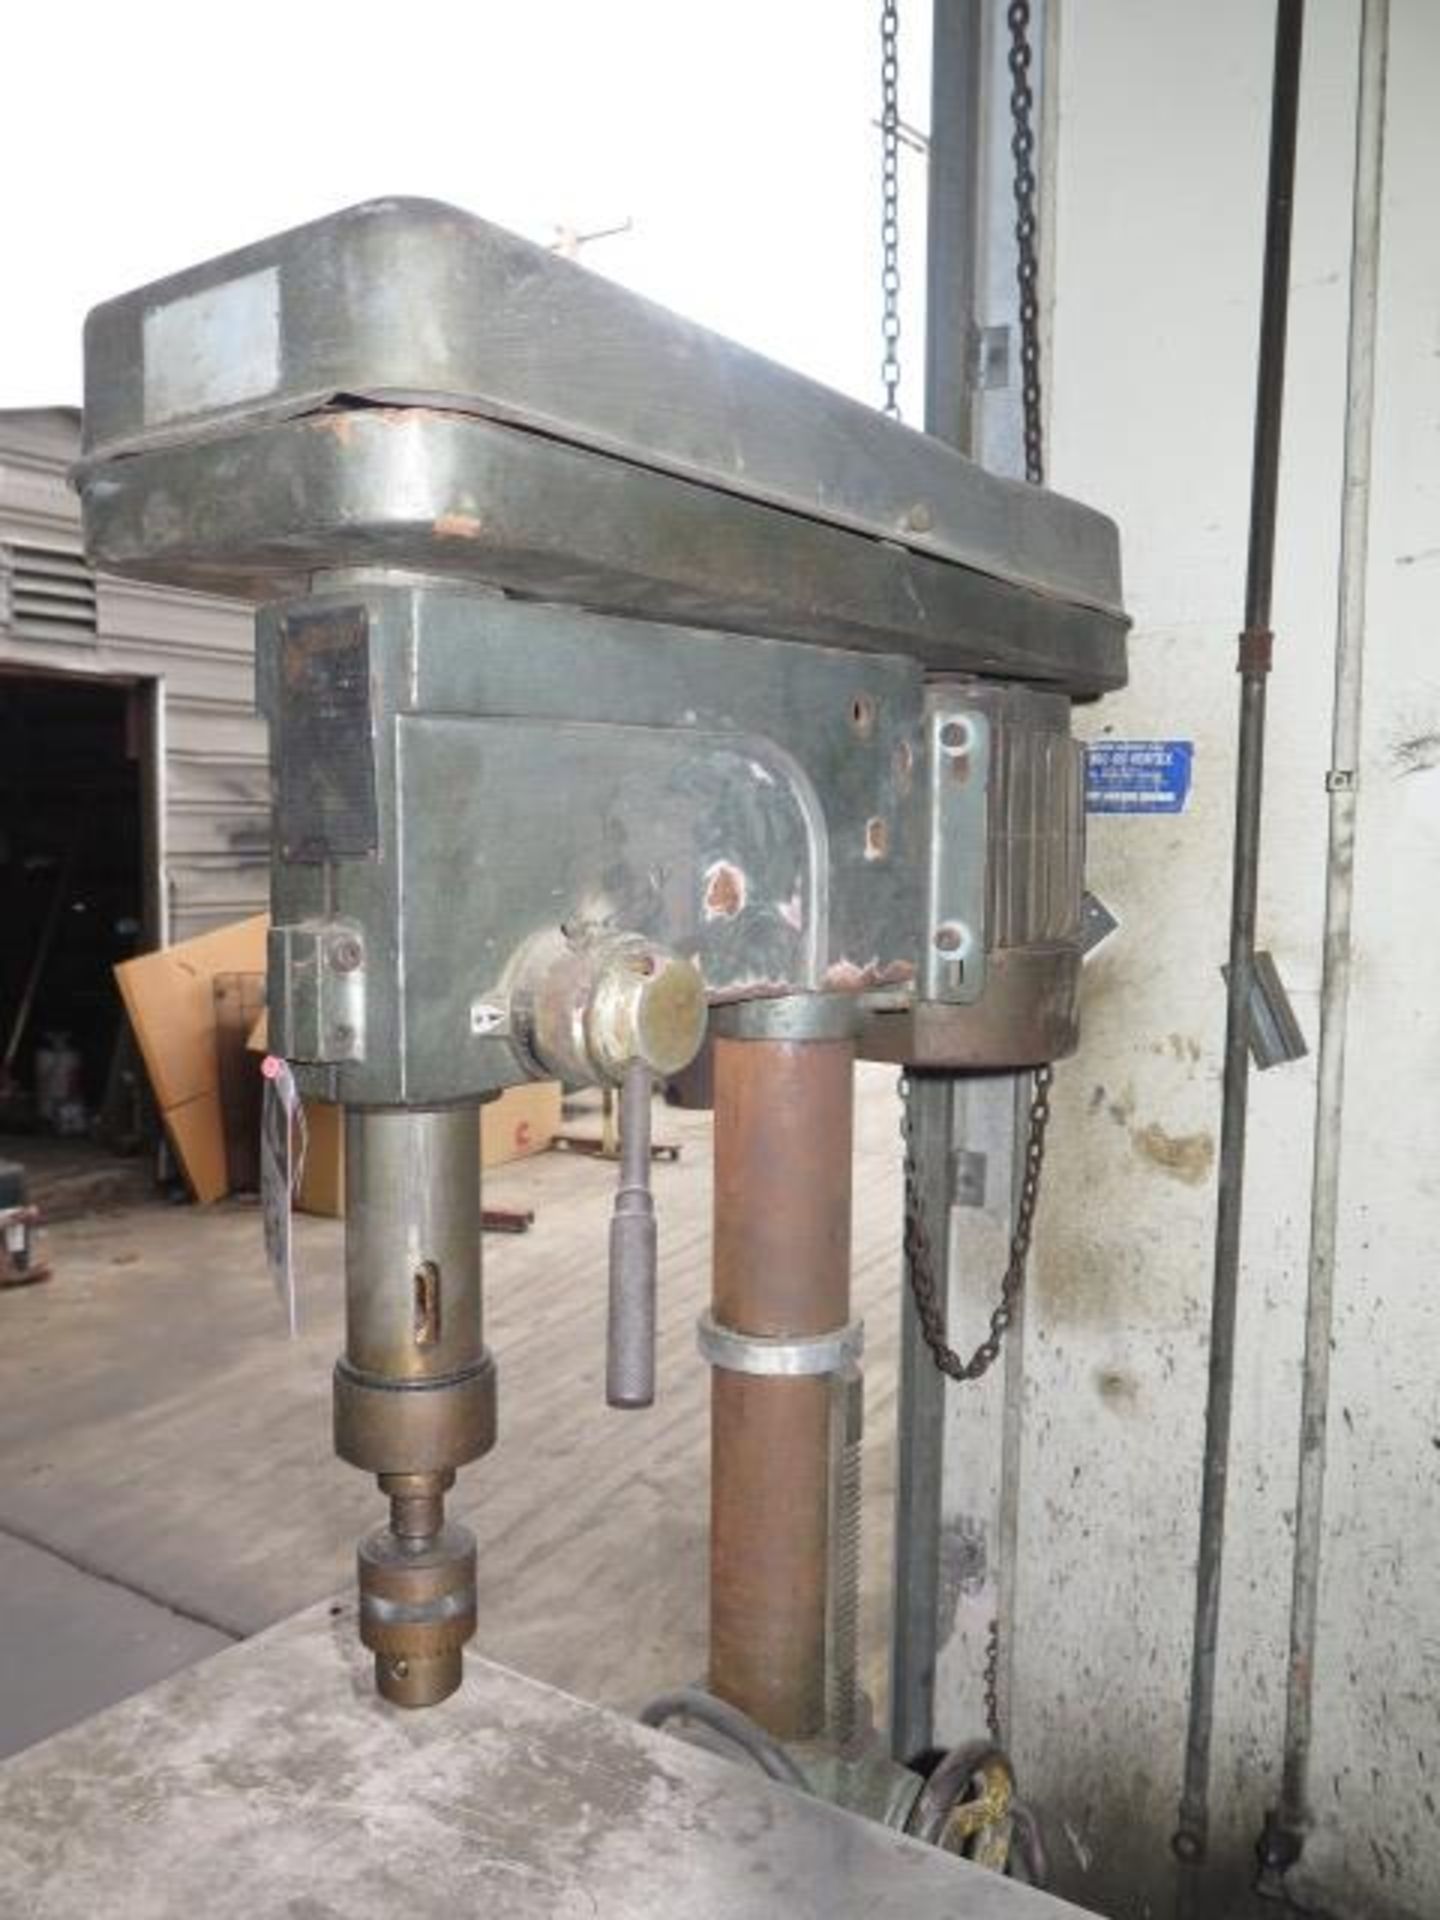 Rexon mdl. 814-7 Pedestal Drill Press (SOLD AS-IS - NO WARRANTY) - Image 2 of 5